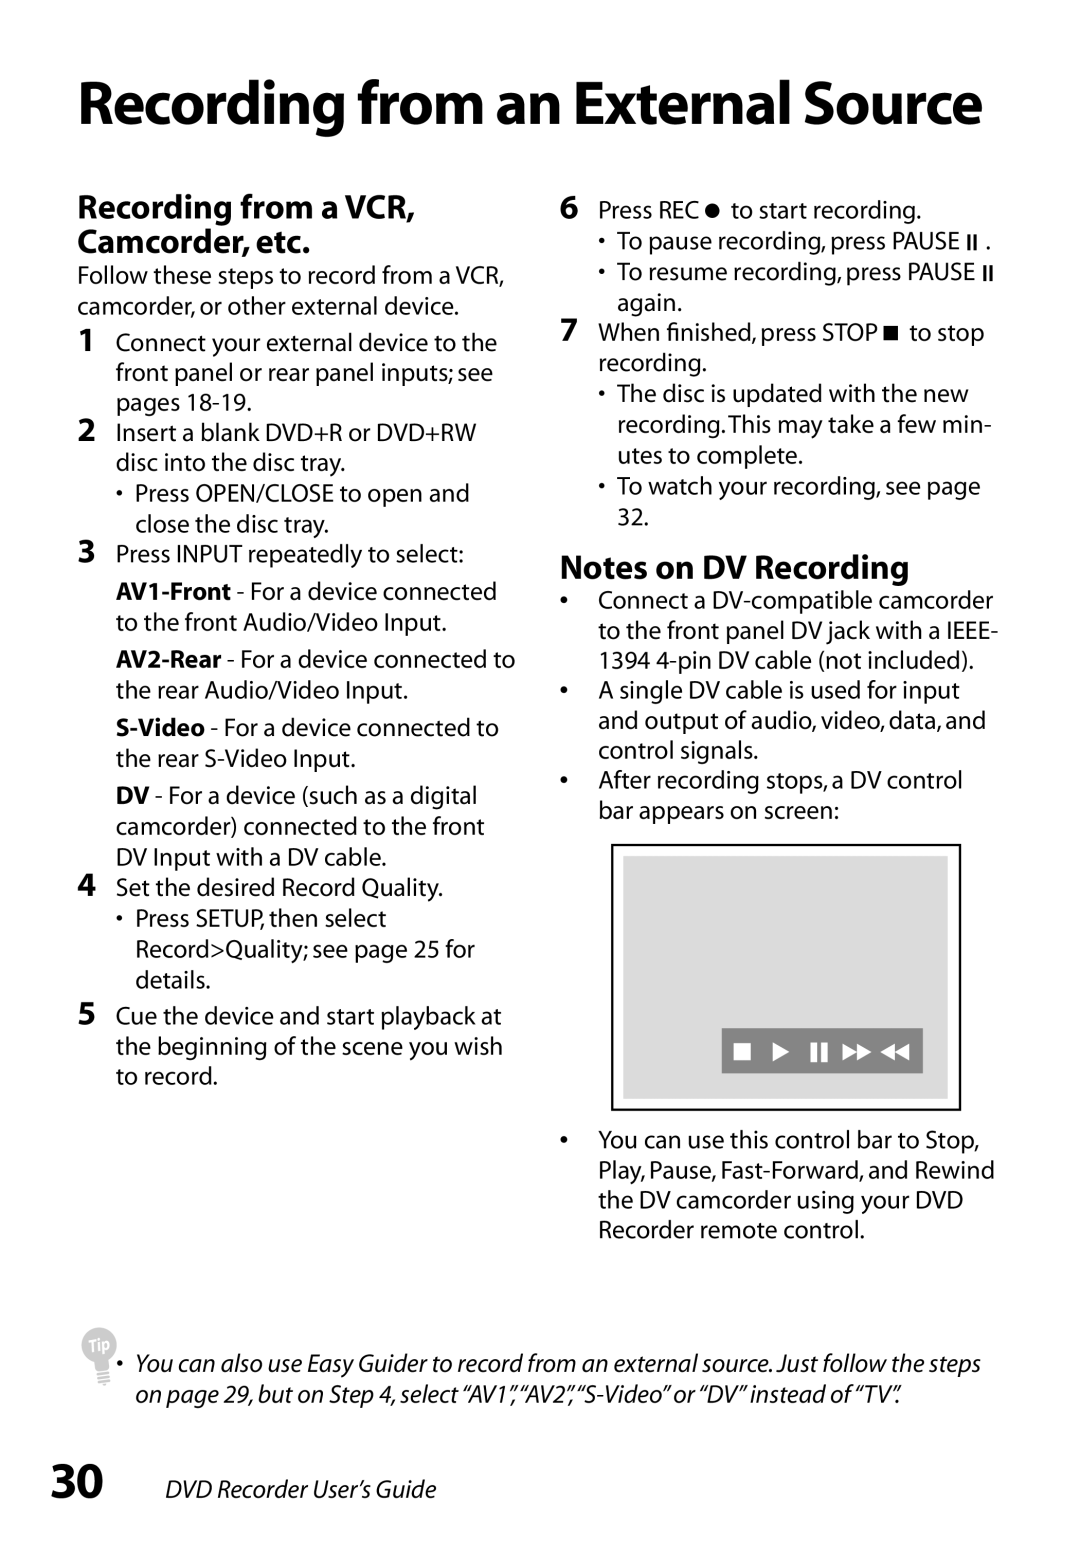 GoVideo R6750 manual Notes on DV Recording, DVD Recorder User’s Guide, Recording from an External Source 